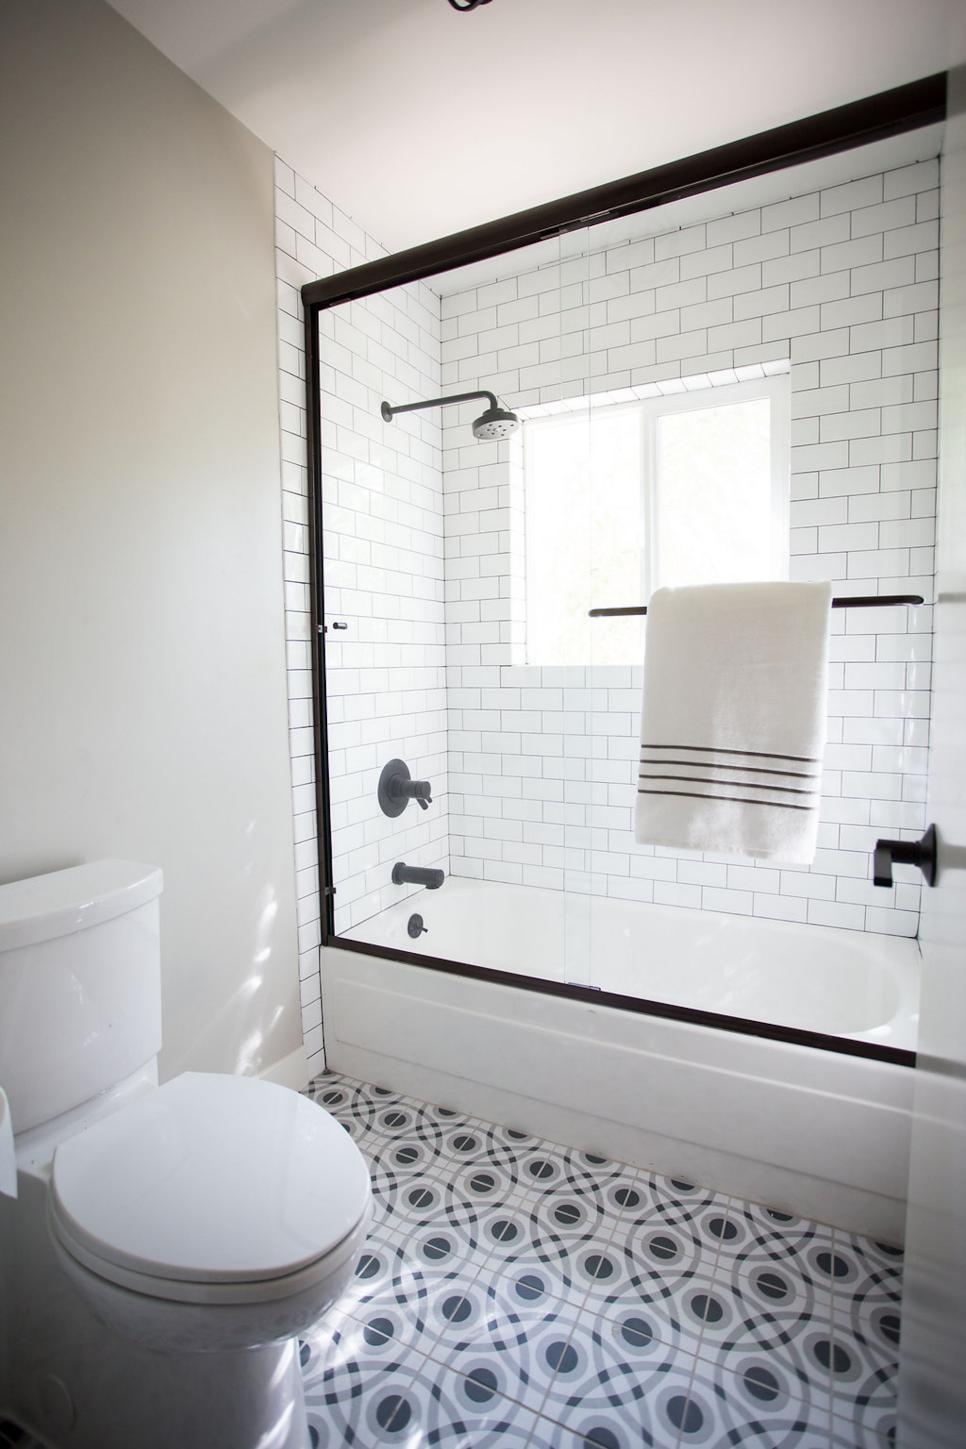 Black and White Bathroom With Patterned Floor Tile and Subway Tile ...